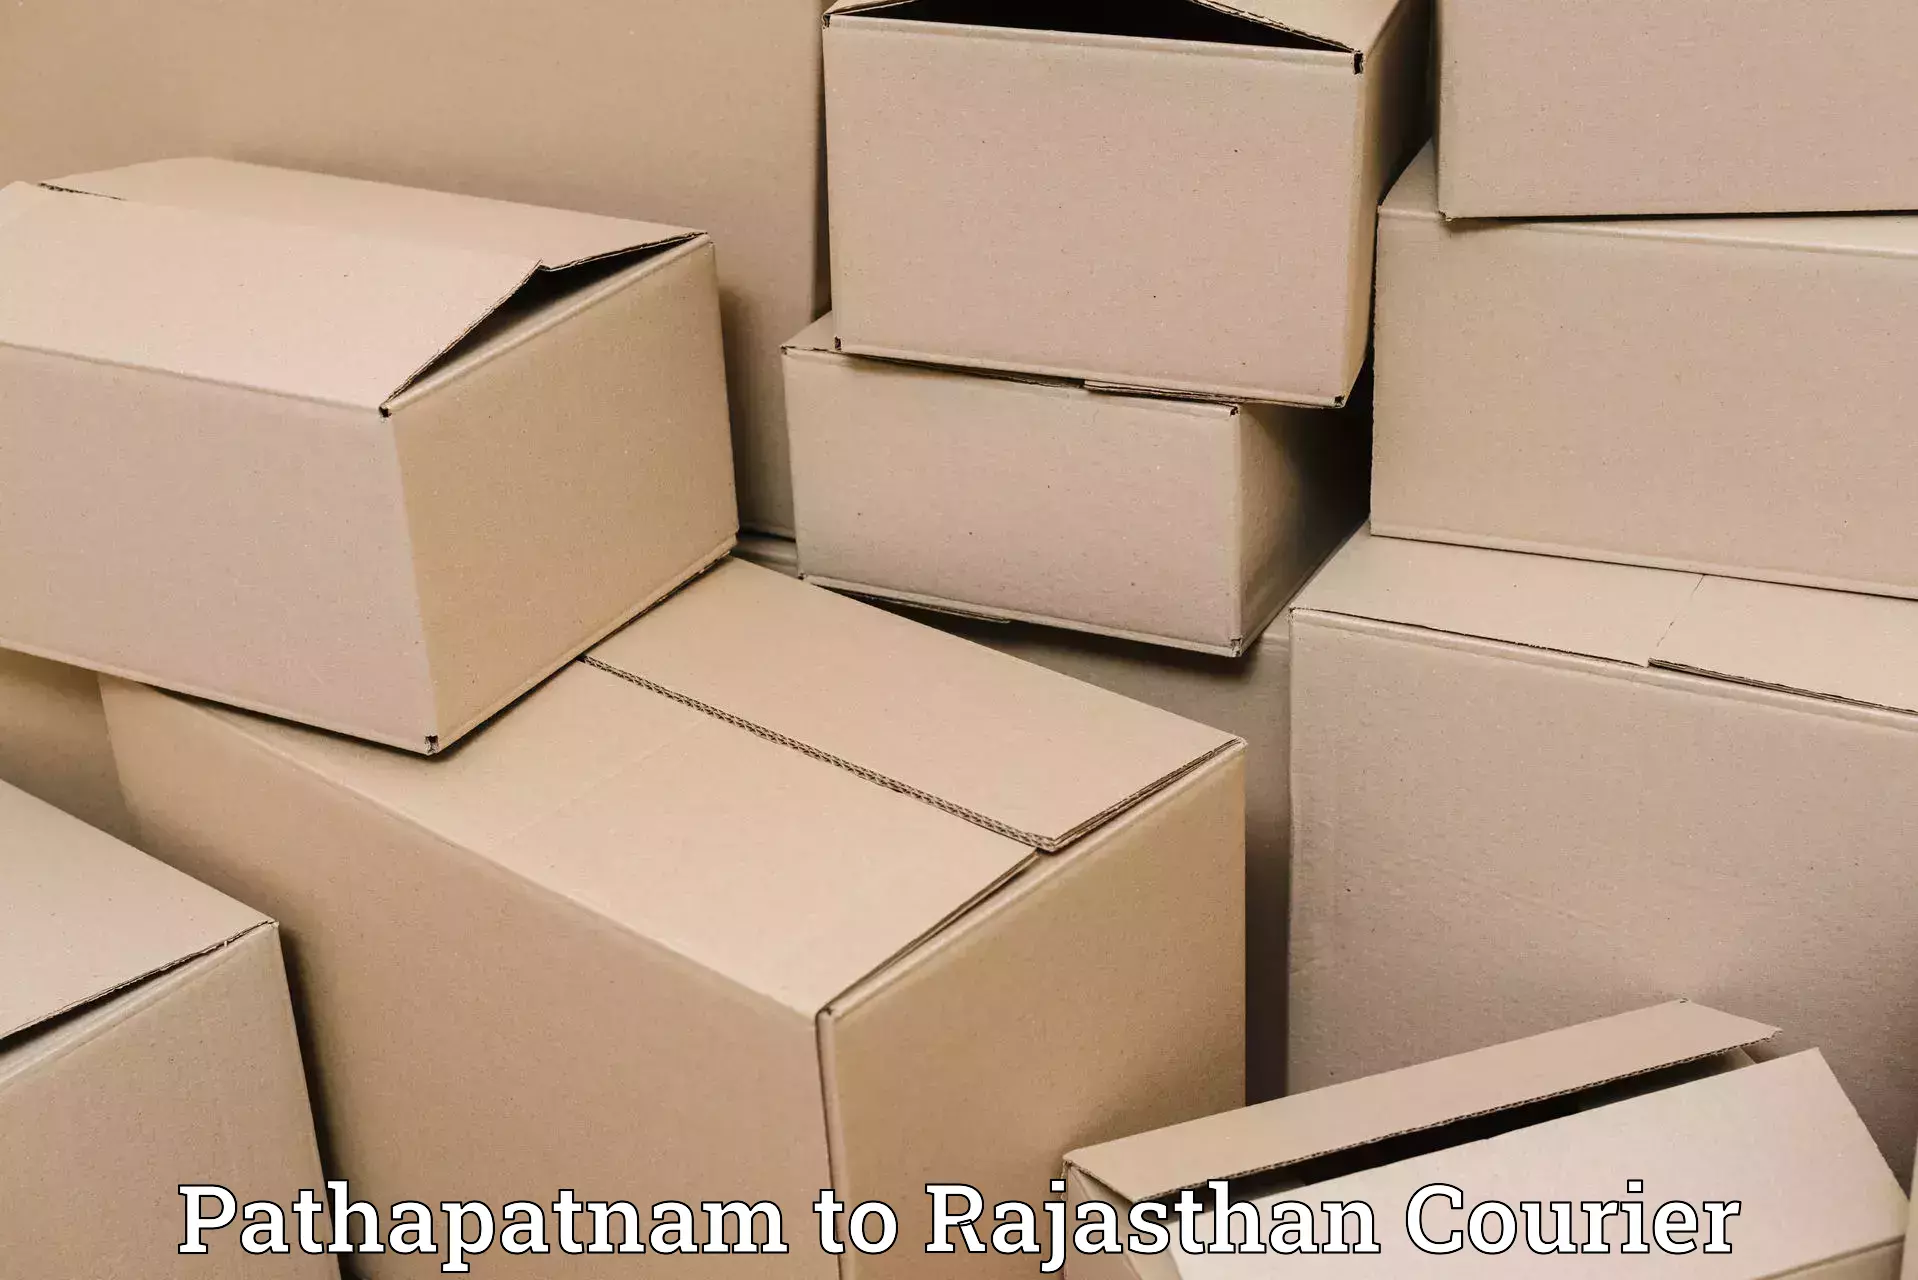 Delivery service partnership Pathapatnam to Rajasthan